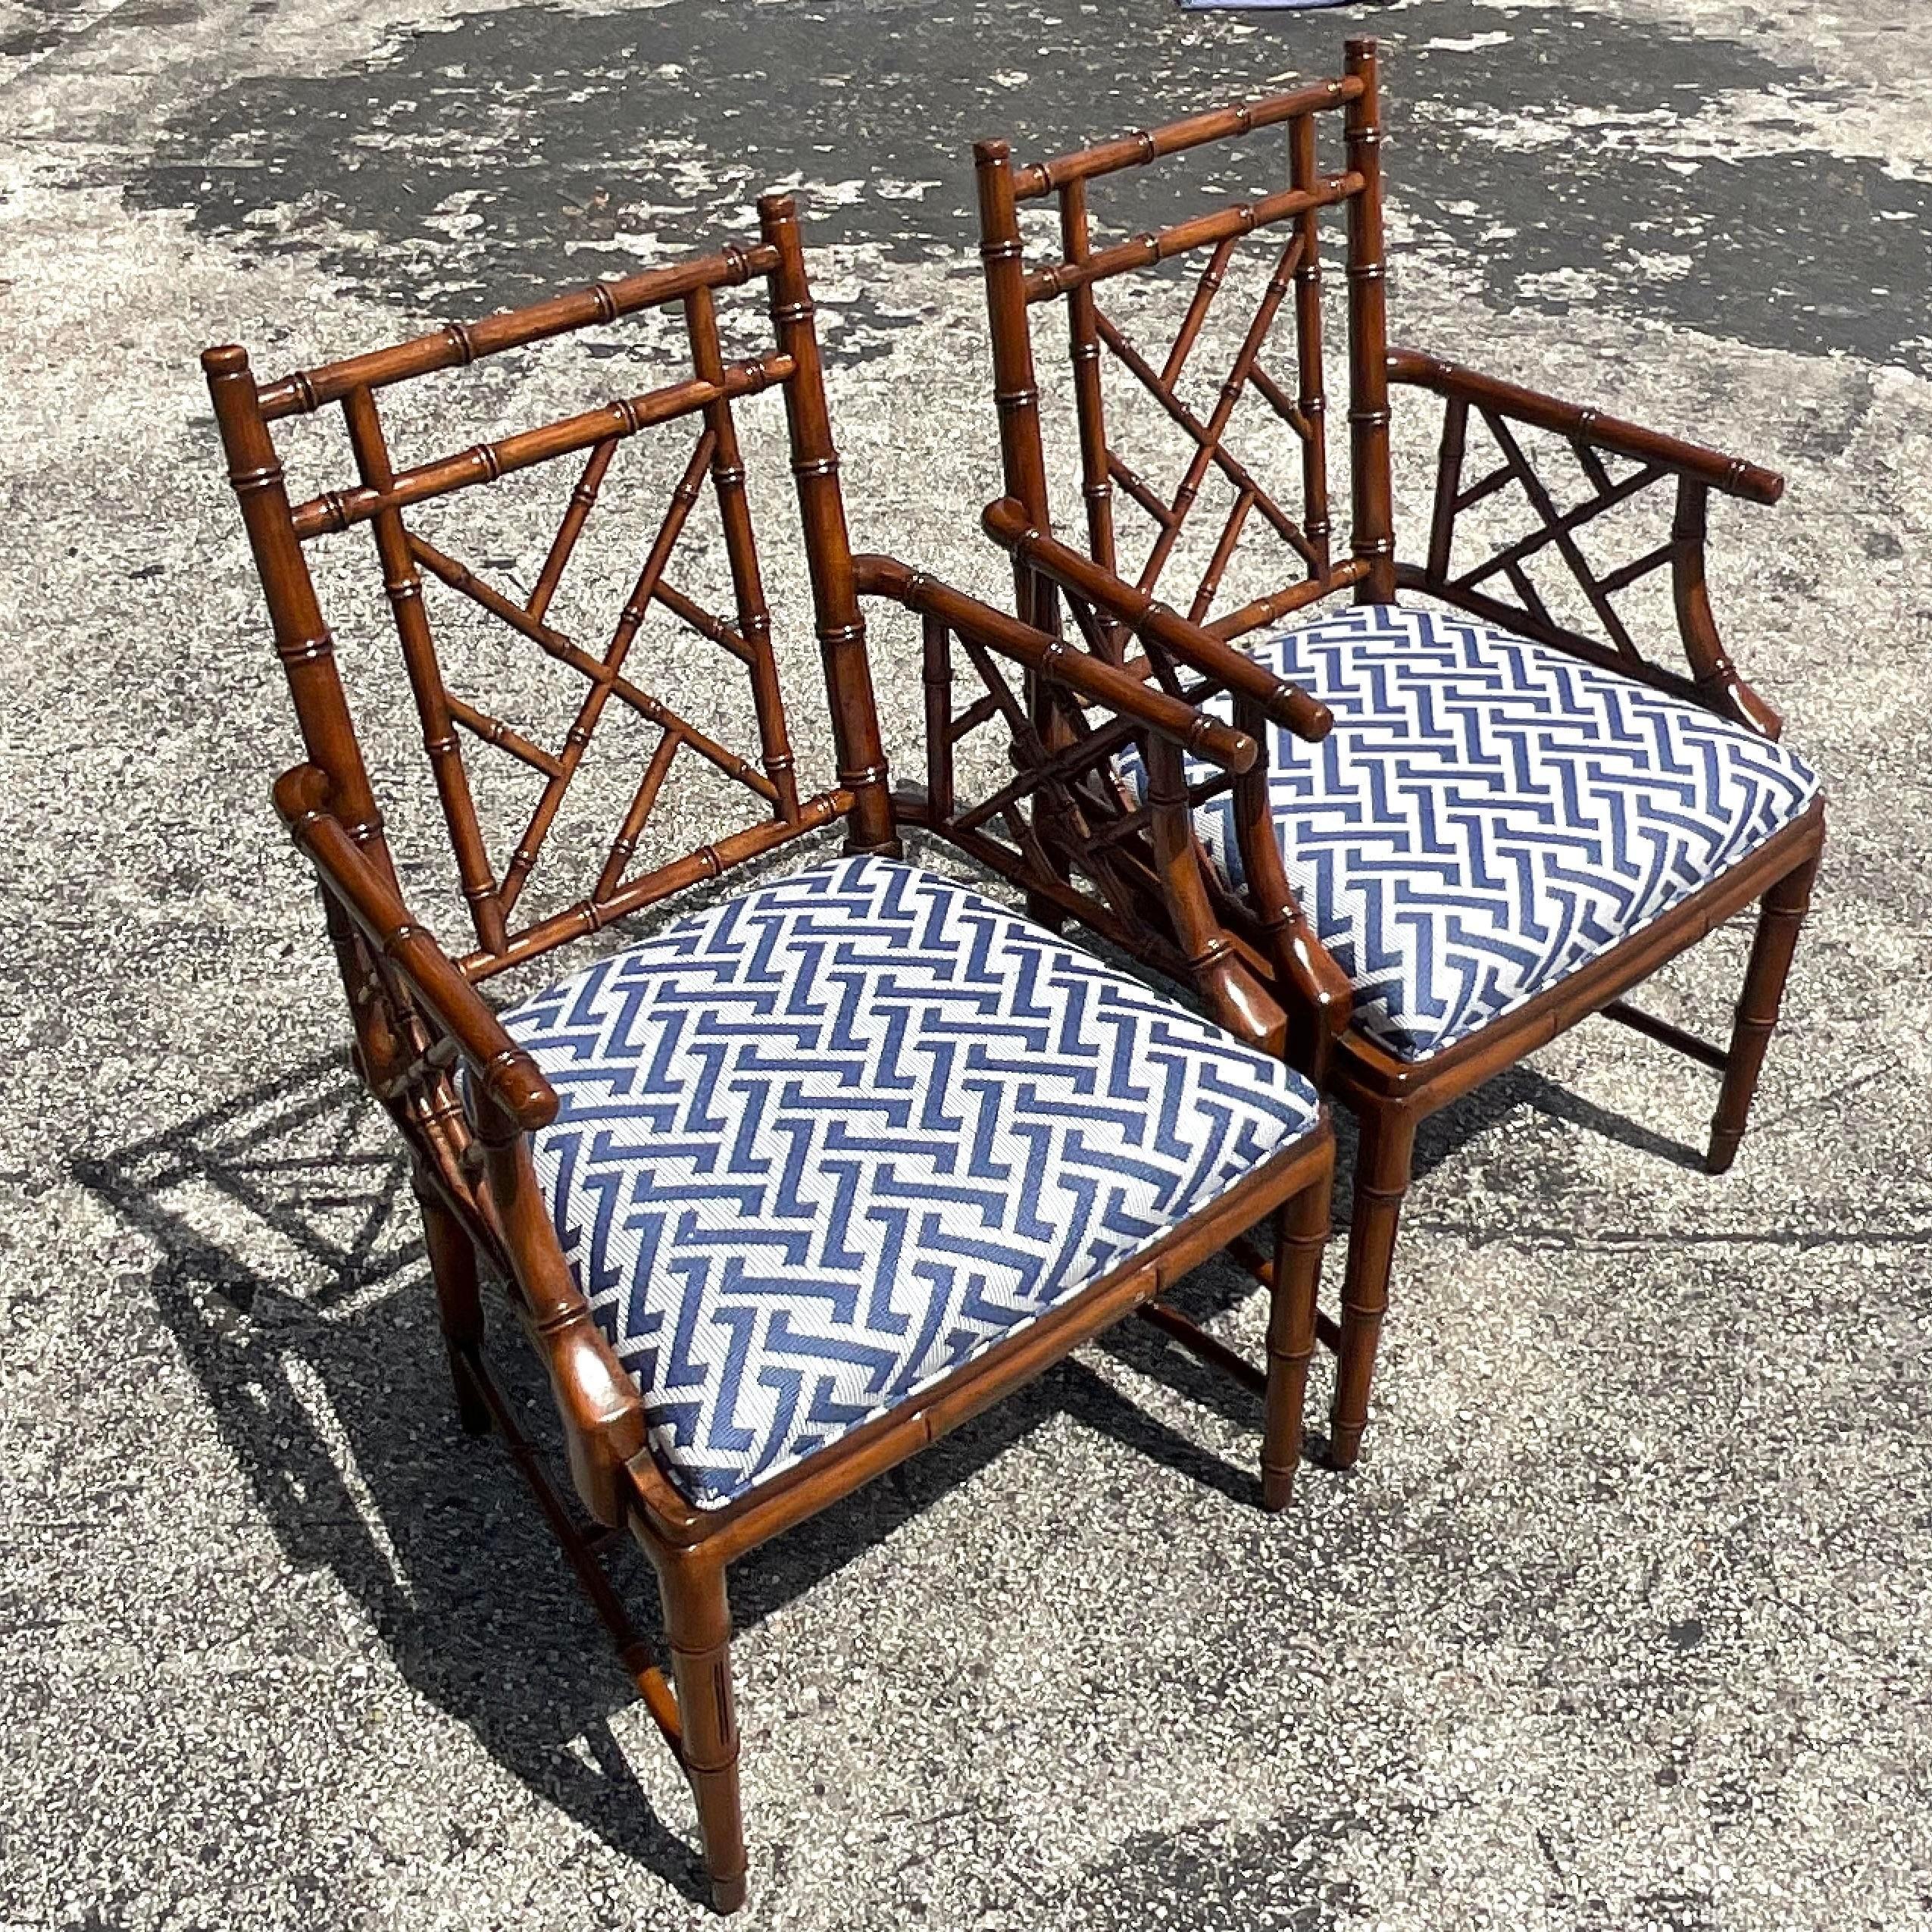 Vintage Regency William Switzer Chinese Chippendale Arm Chairs - a Pair For Sale 2